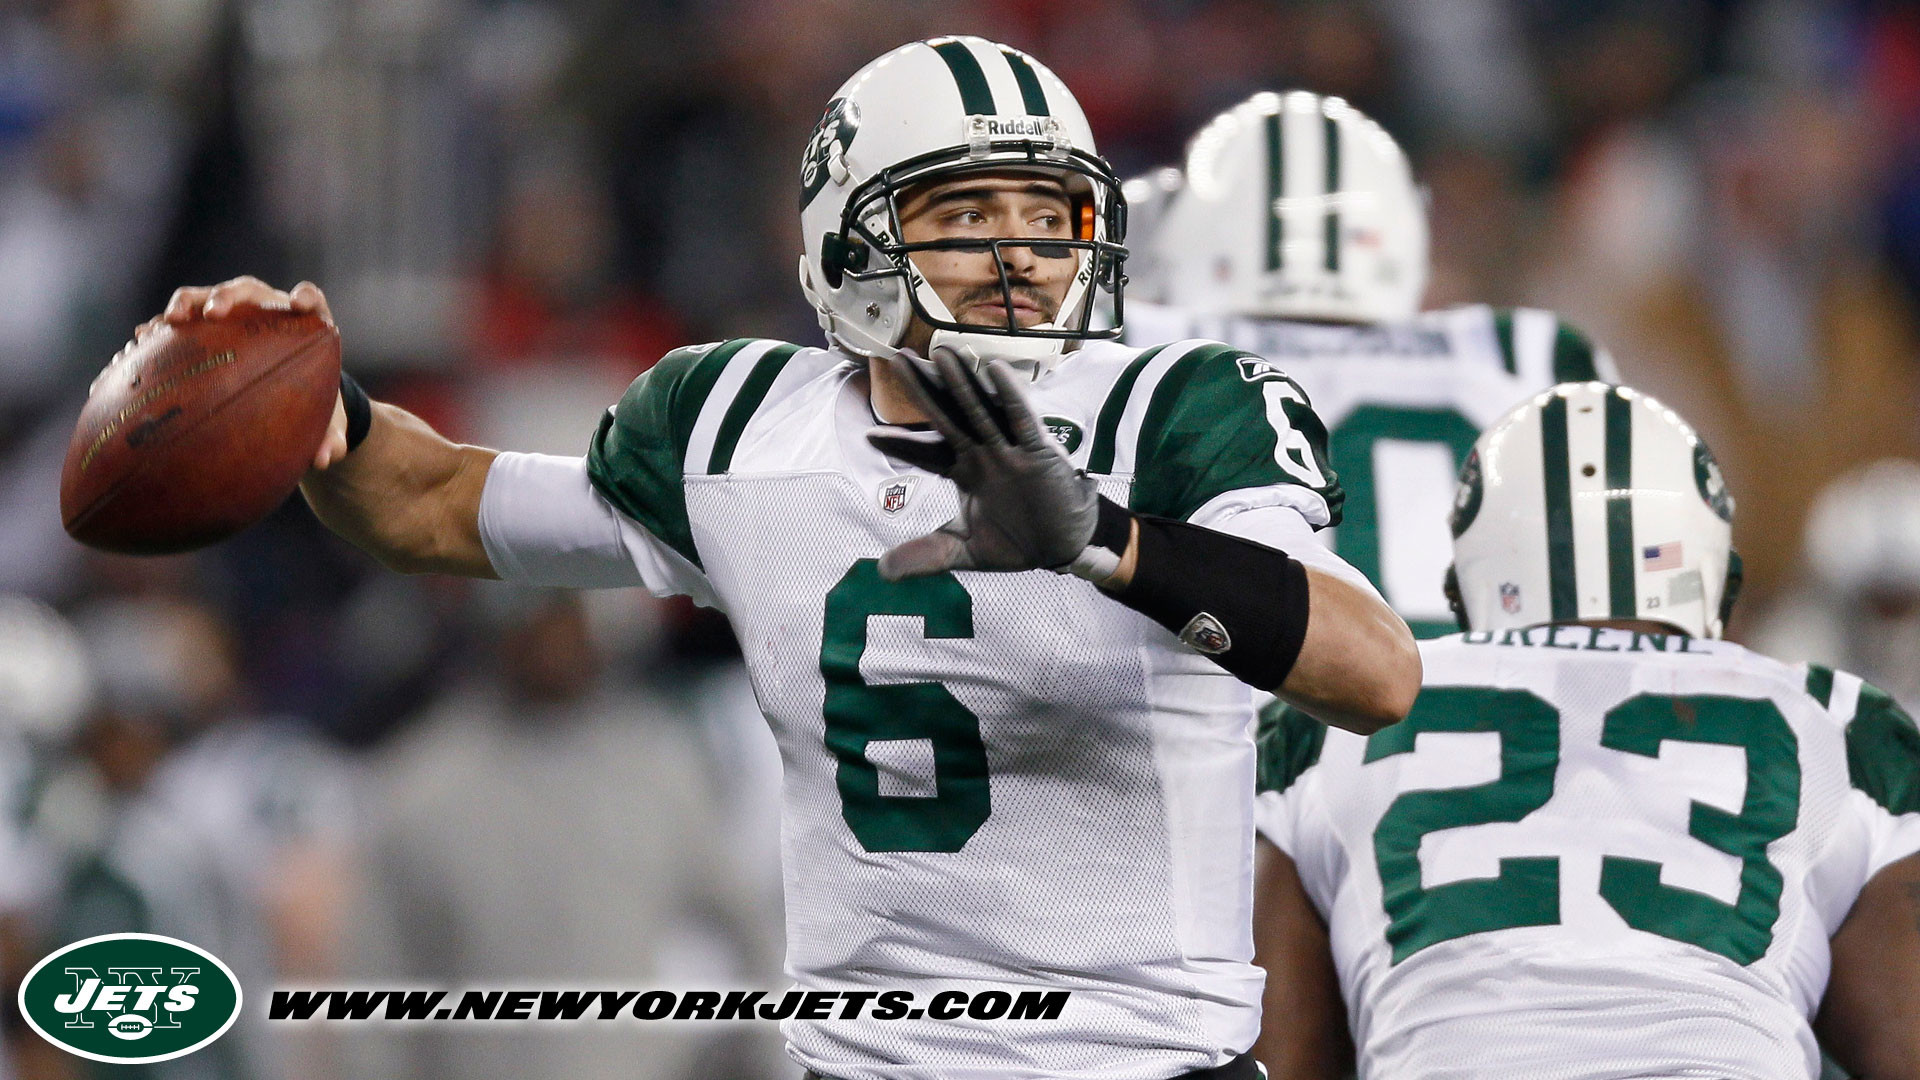 1920x1080 New York Jets HD Wallpaper | Background Image |  | ID:149993 -  Wallpaper Abyss